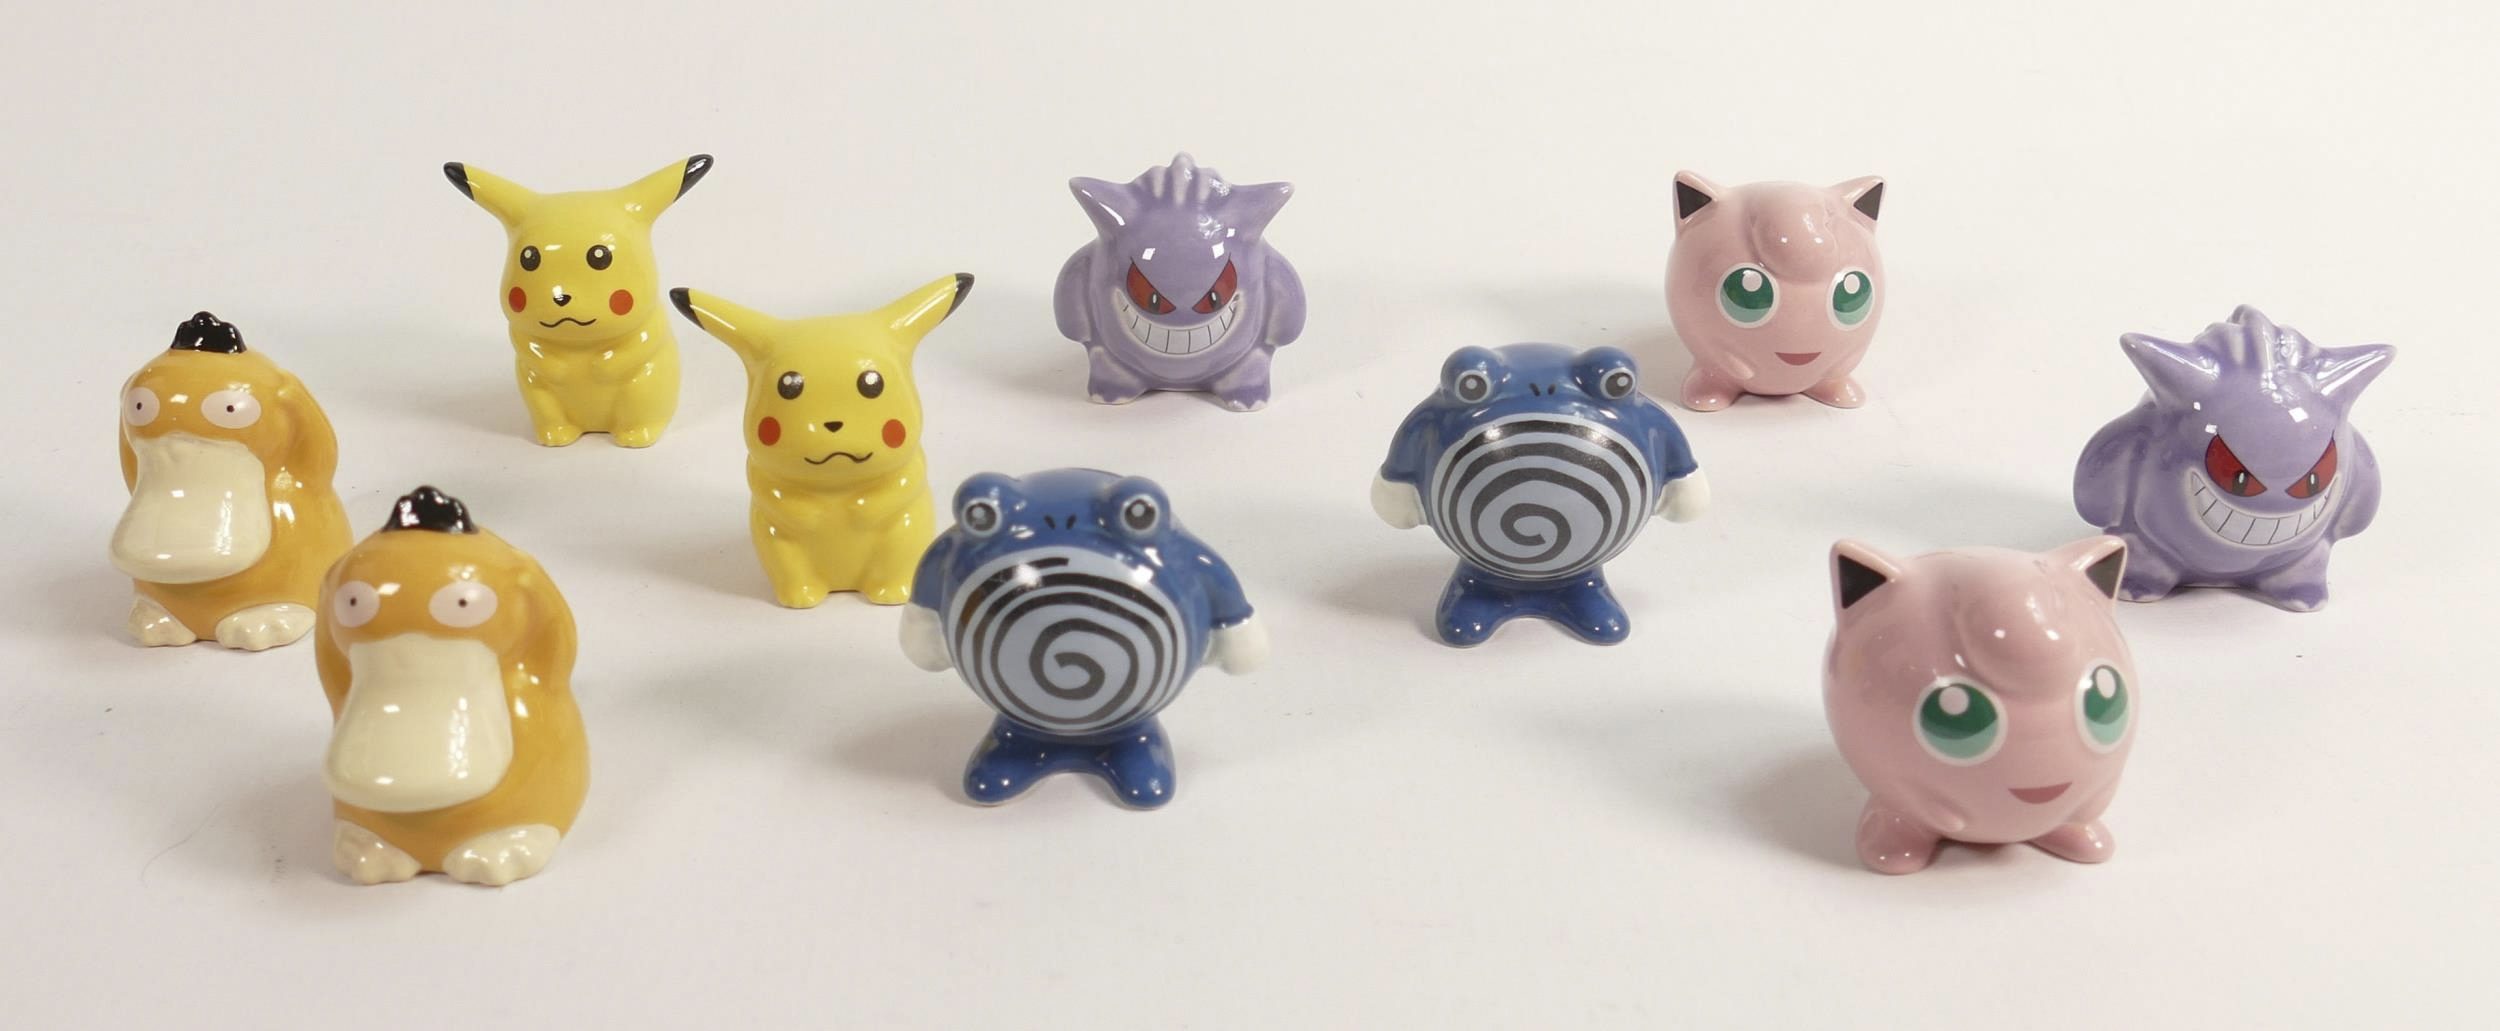 Lot 42 was two sets of Wade Pokemon figures of Jigglypuff, Psyduck, Pikachu, Gengar and Polywhirl, made in 2001 for the release of the Pokemon Gold & Silver Nintendo games. These items were removed from the archives of the Wade factory, and are possibly prototypes or colour samples! The lot sold for an impressive £240 altogether.